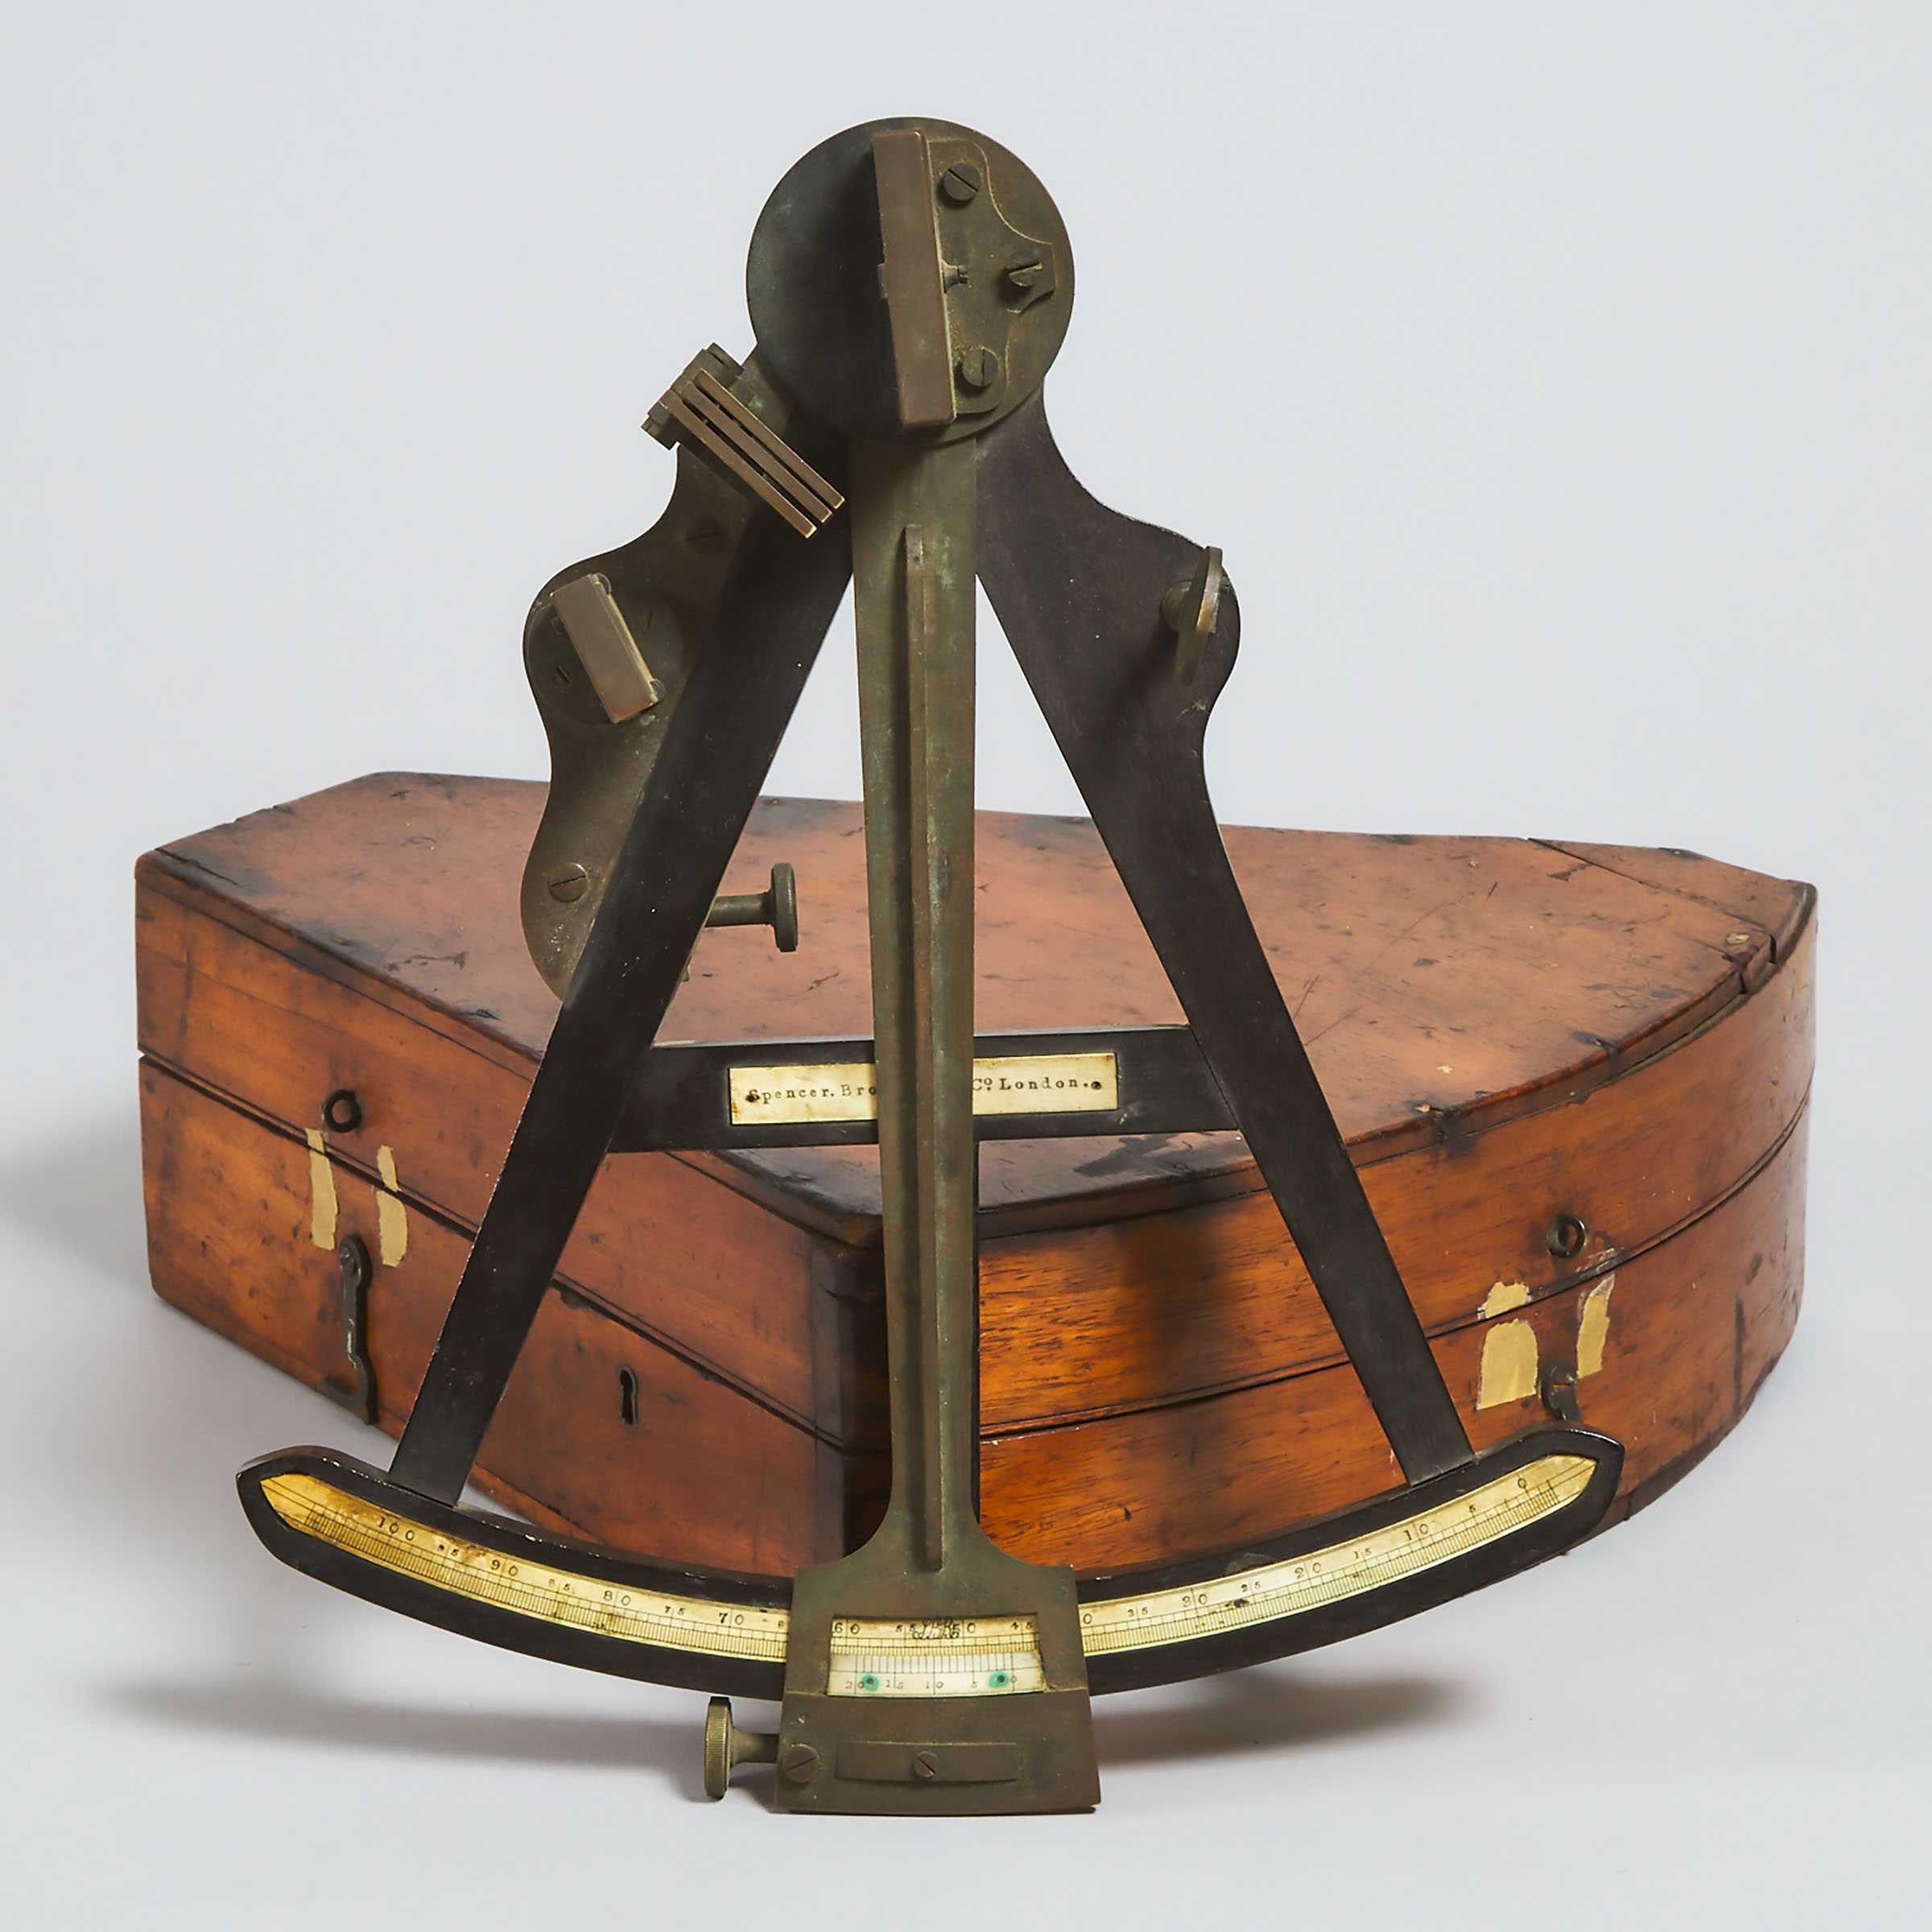 English Octant, Spencer Browning & Co., London, mid 19th century